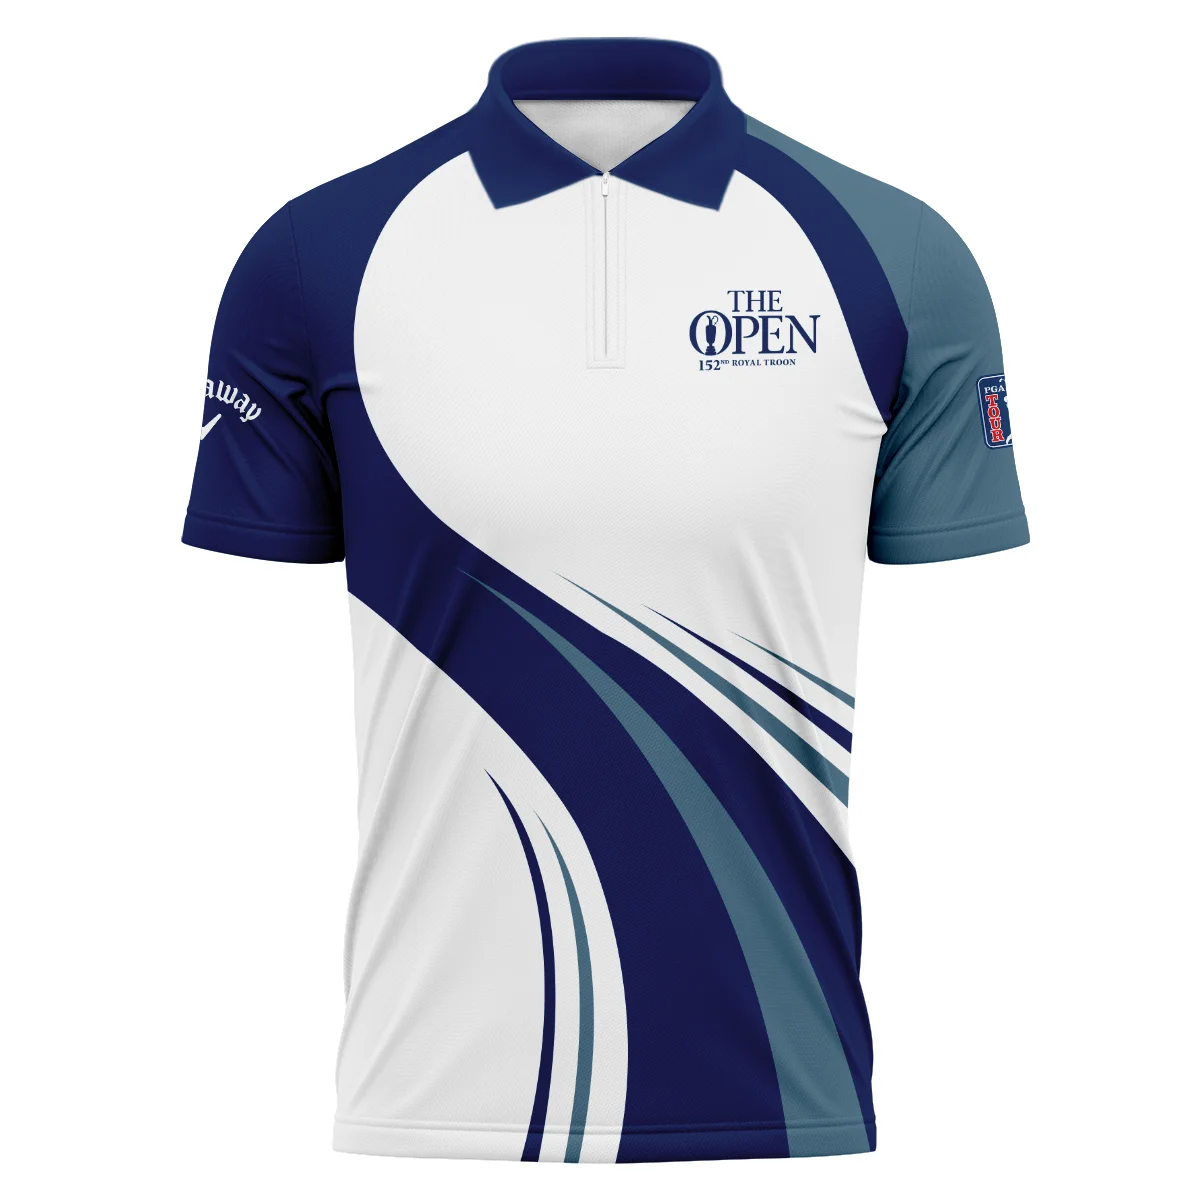 152nd Open Championship Callaway White Mostly Desaturated Dark Blue Polo Shirt All Over Prints HOTOP270624A02CLWPL